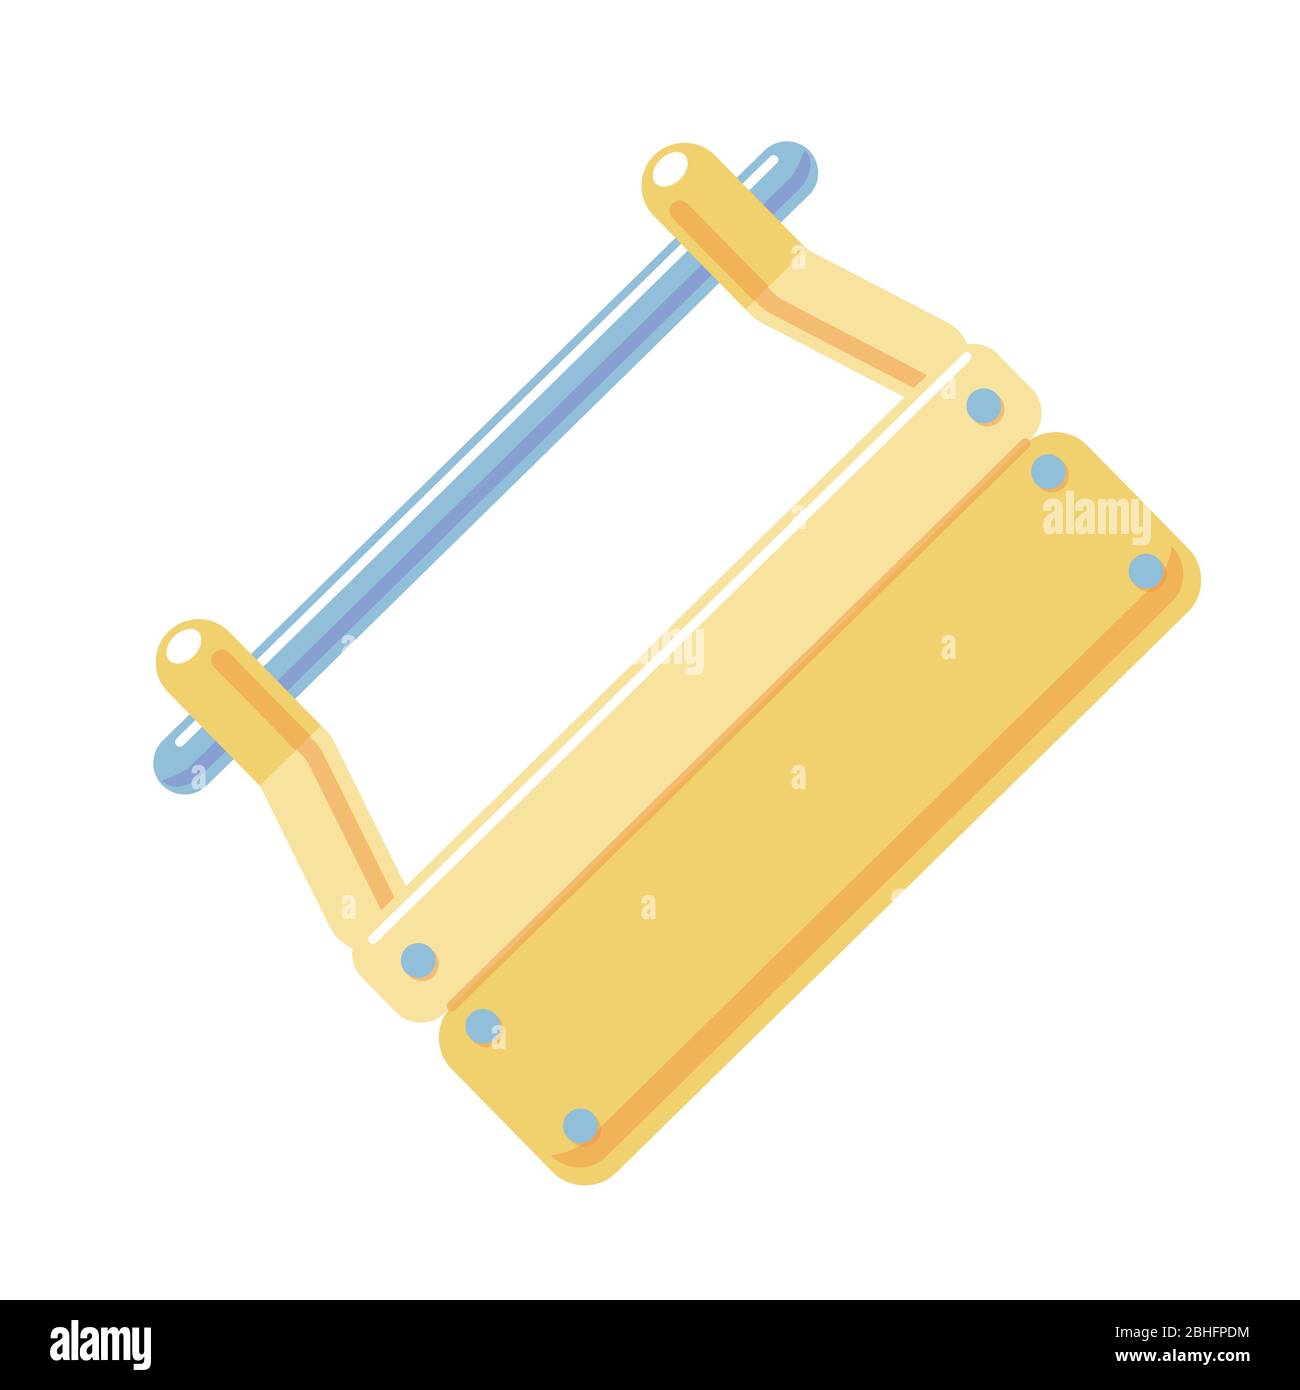 Wooden toolbox Vector icon. Empty open tool box isolated on white background. Element of construction tools. Cartoon flat design. Hand carpenter instrument illustration. Simple Wood working. Stock Vector